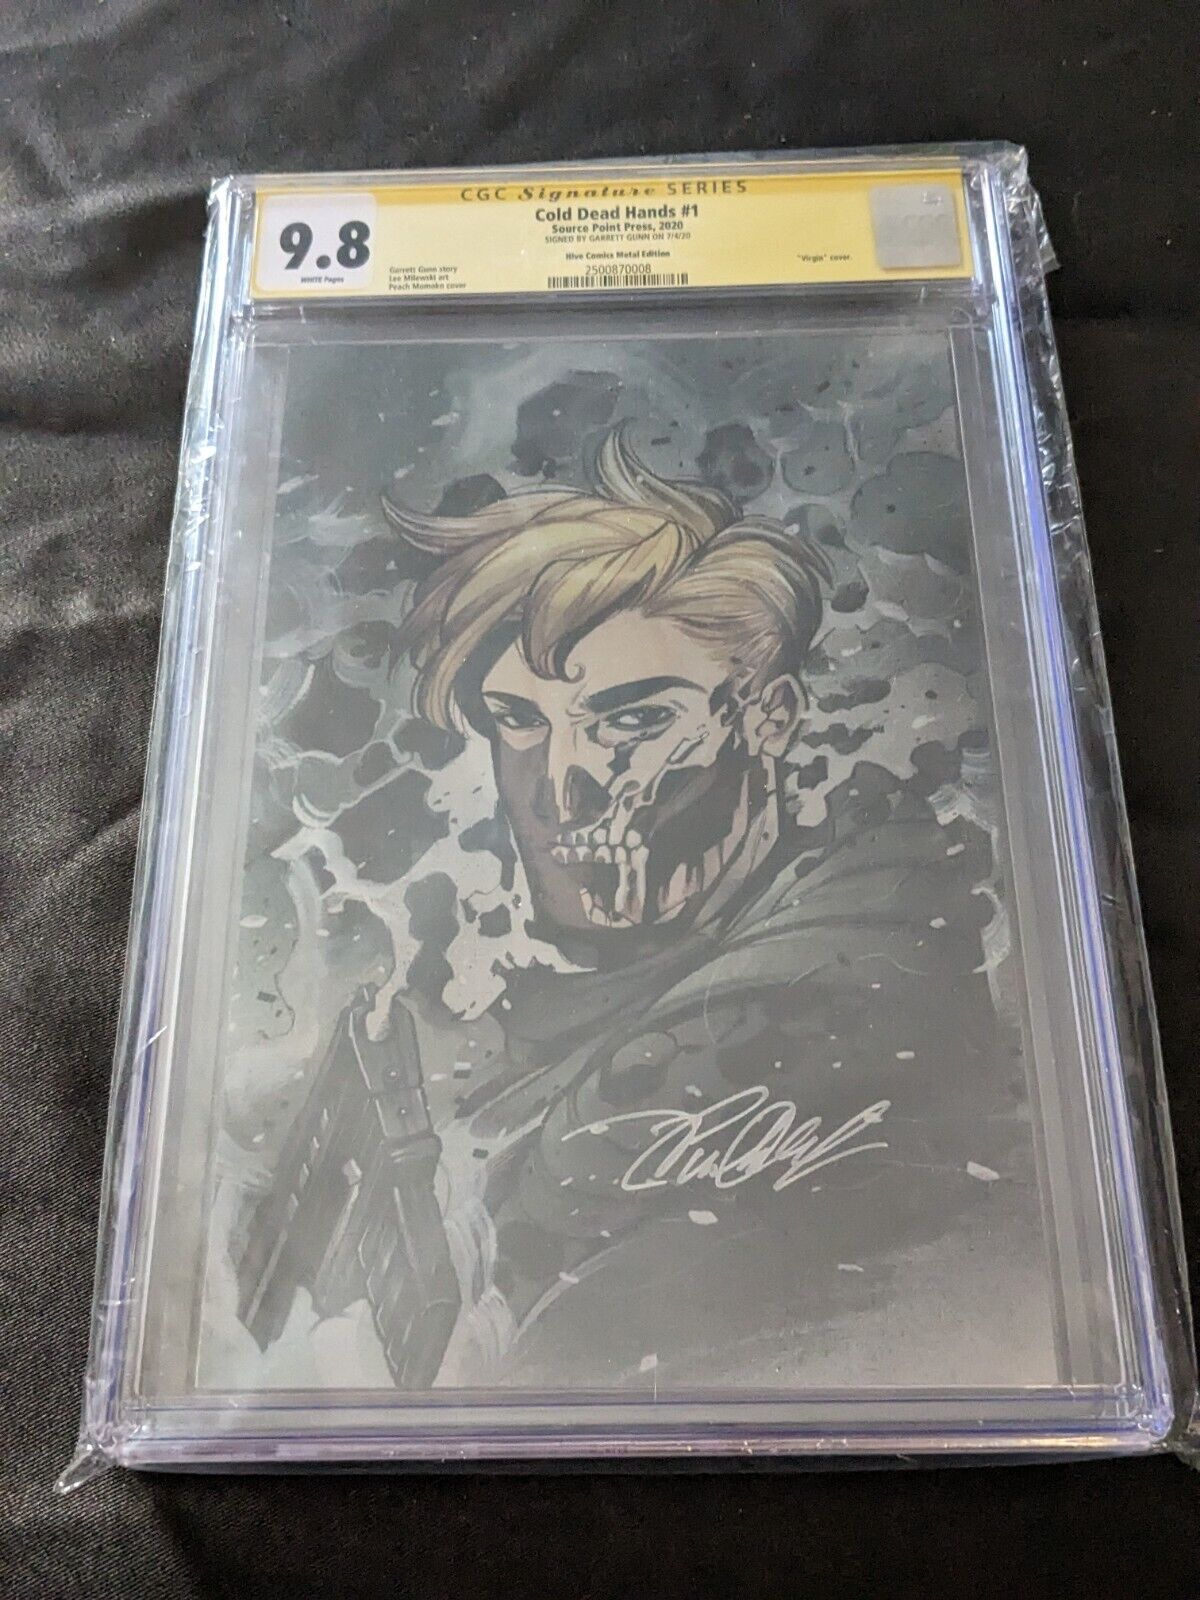 Cold Dead Hands 1 CGC Signature 9.8 Peach Momoko Cover Metal Edition 1 of 30